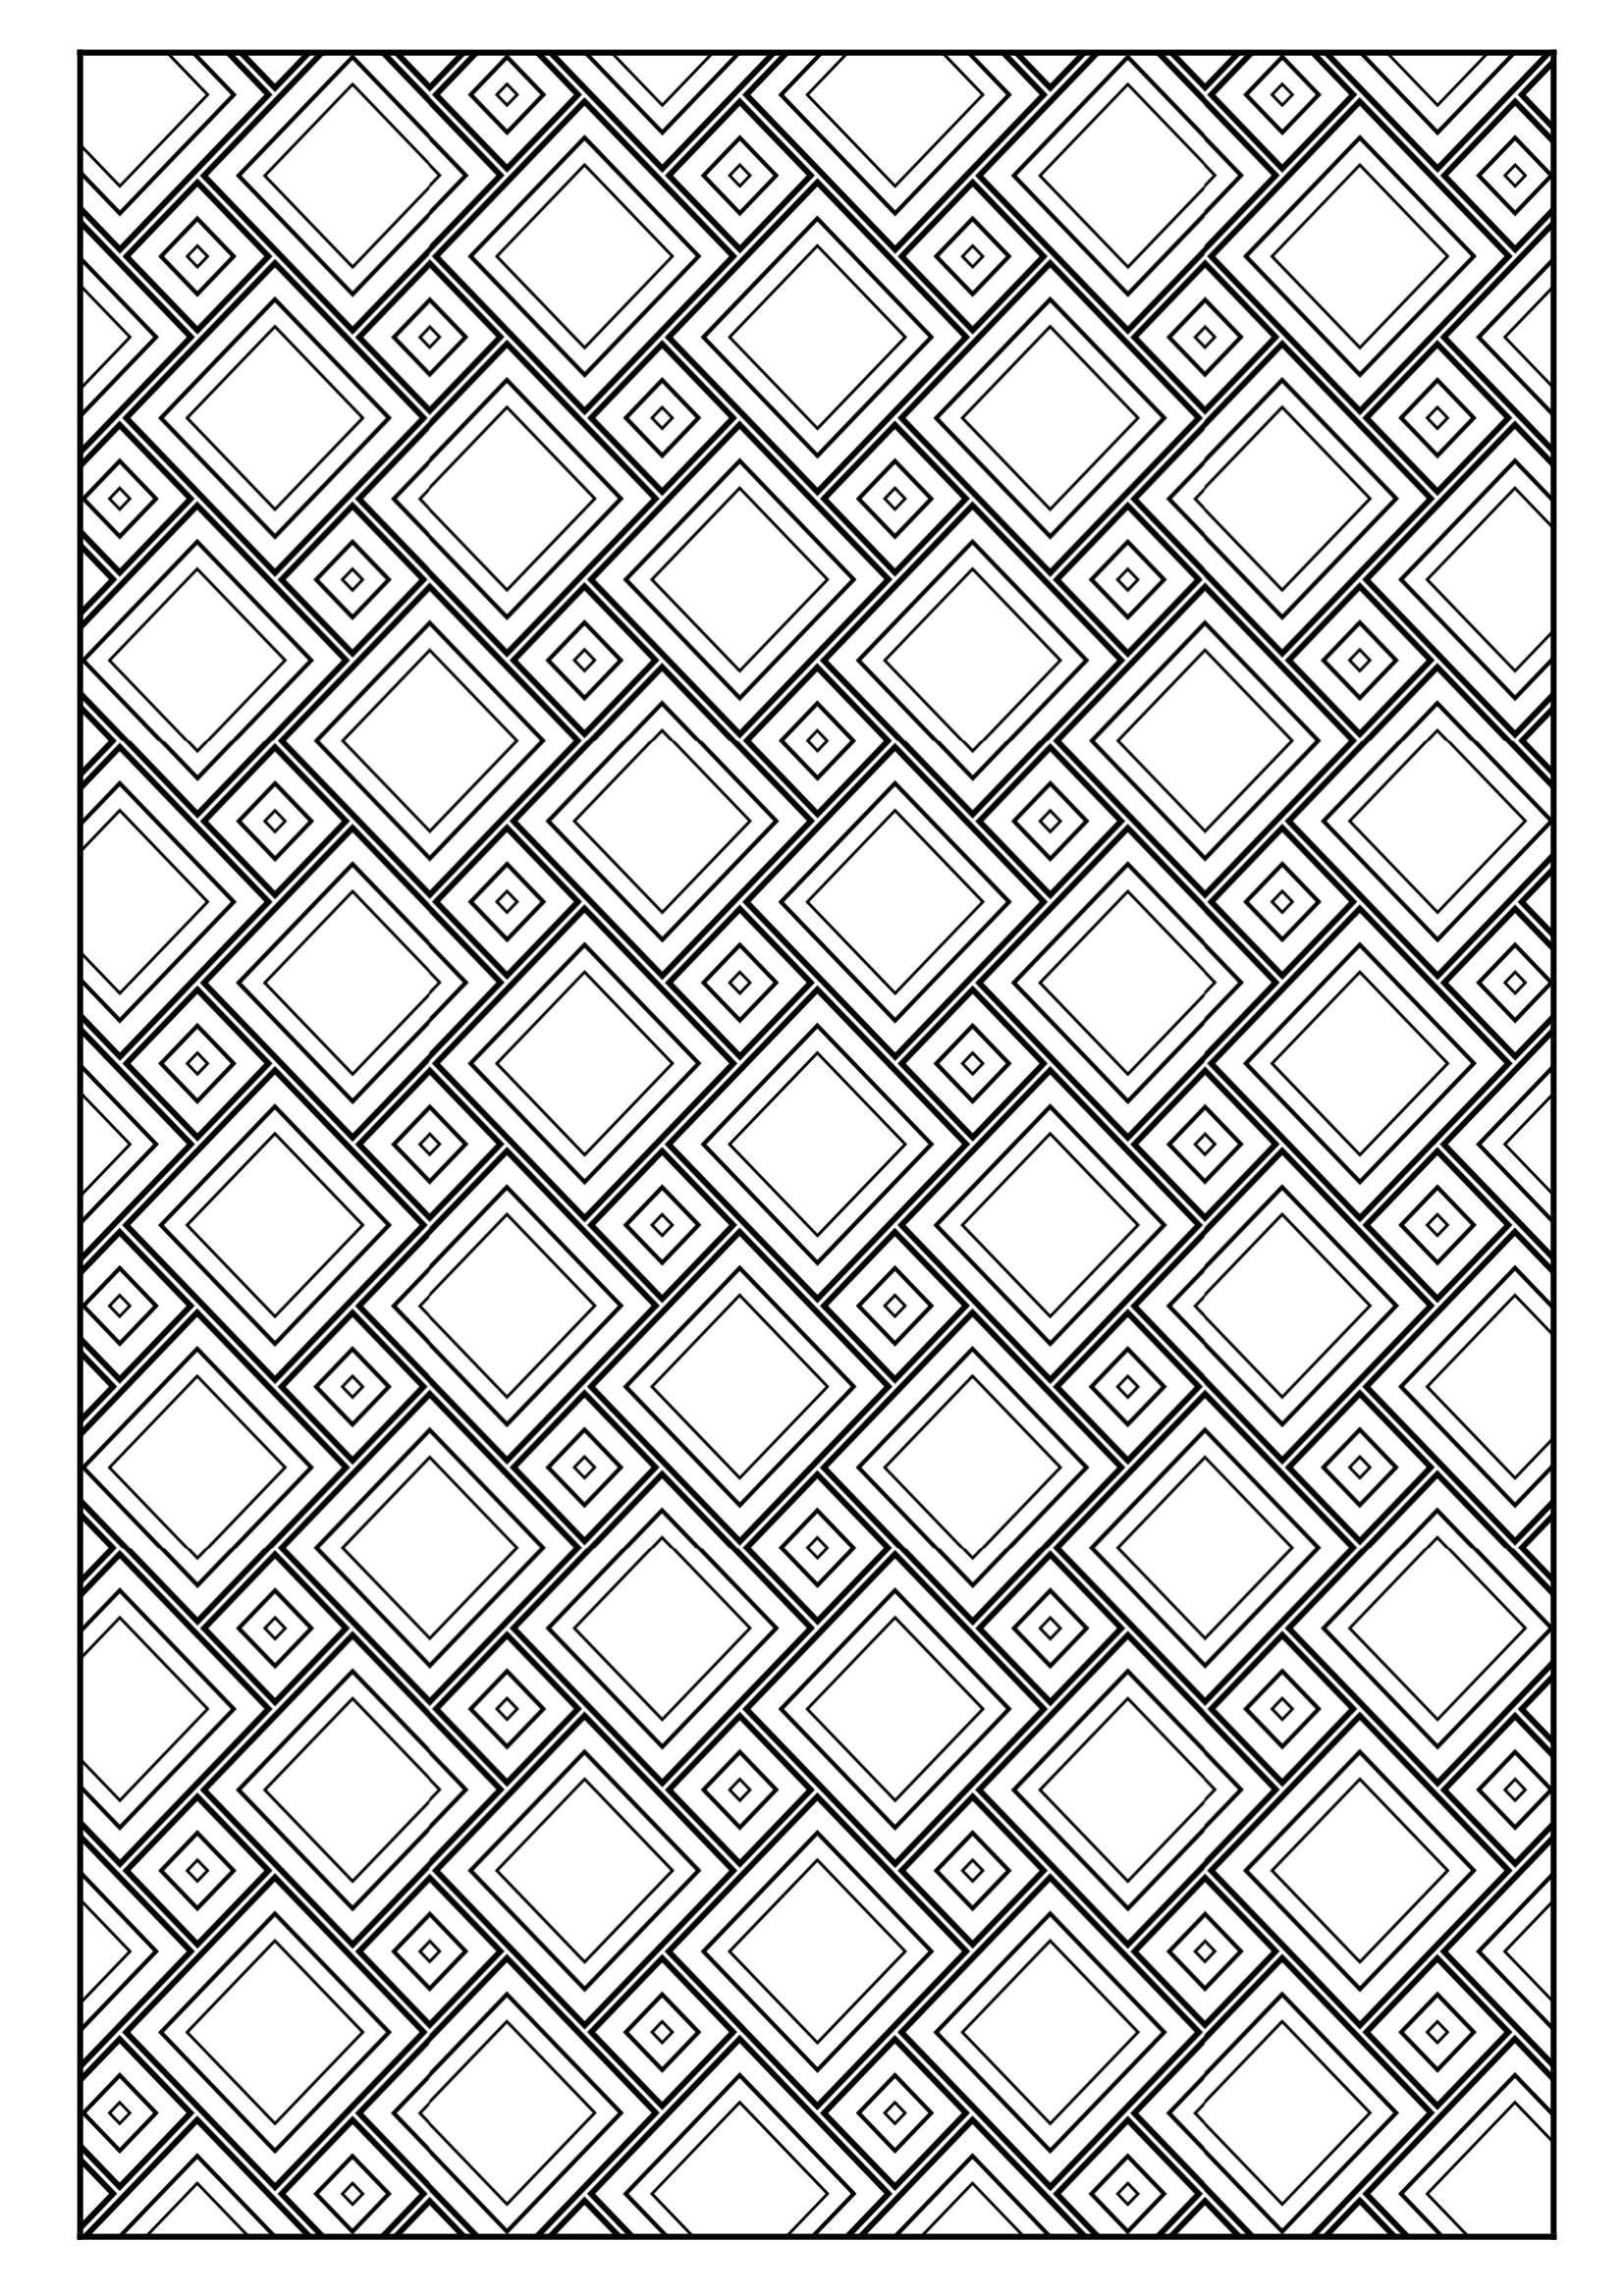 Set of printable coloring pages with geometric designs kids and adults coloring pages patterns relaxing activity stress relief vol